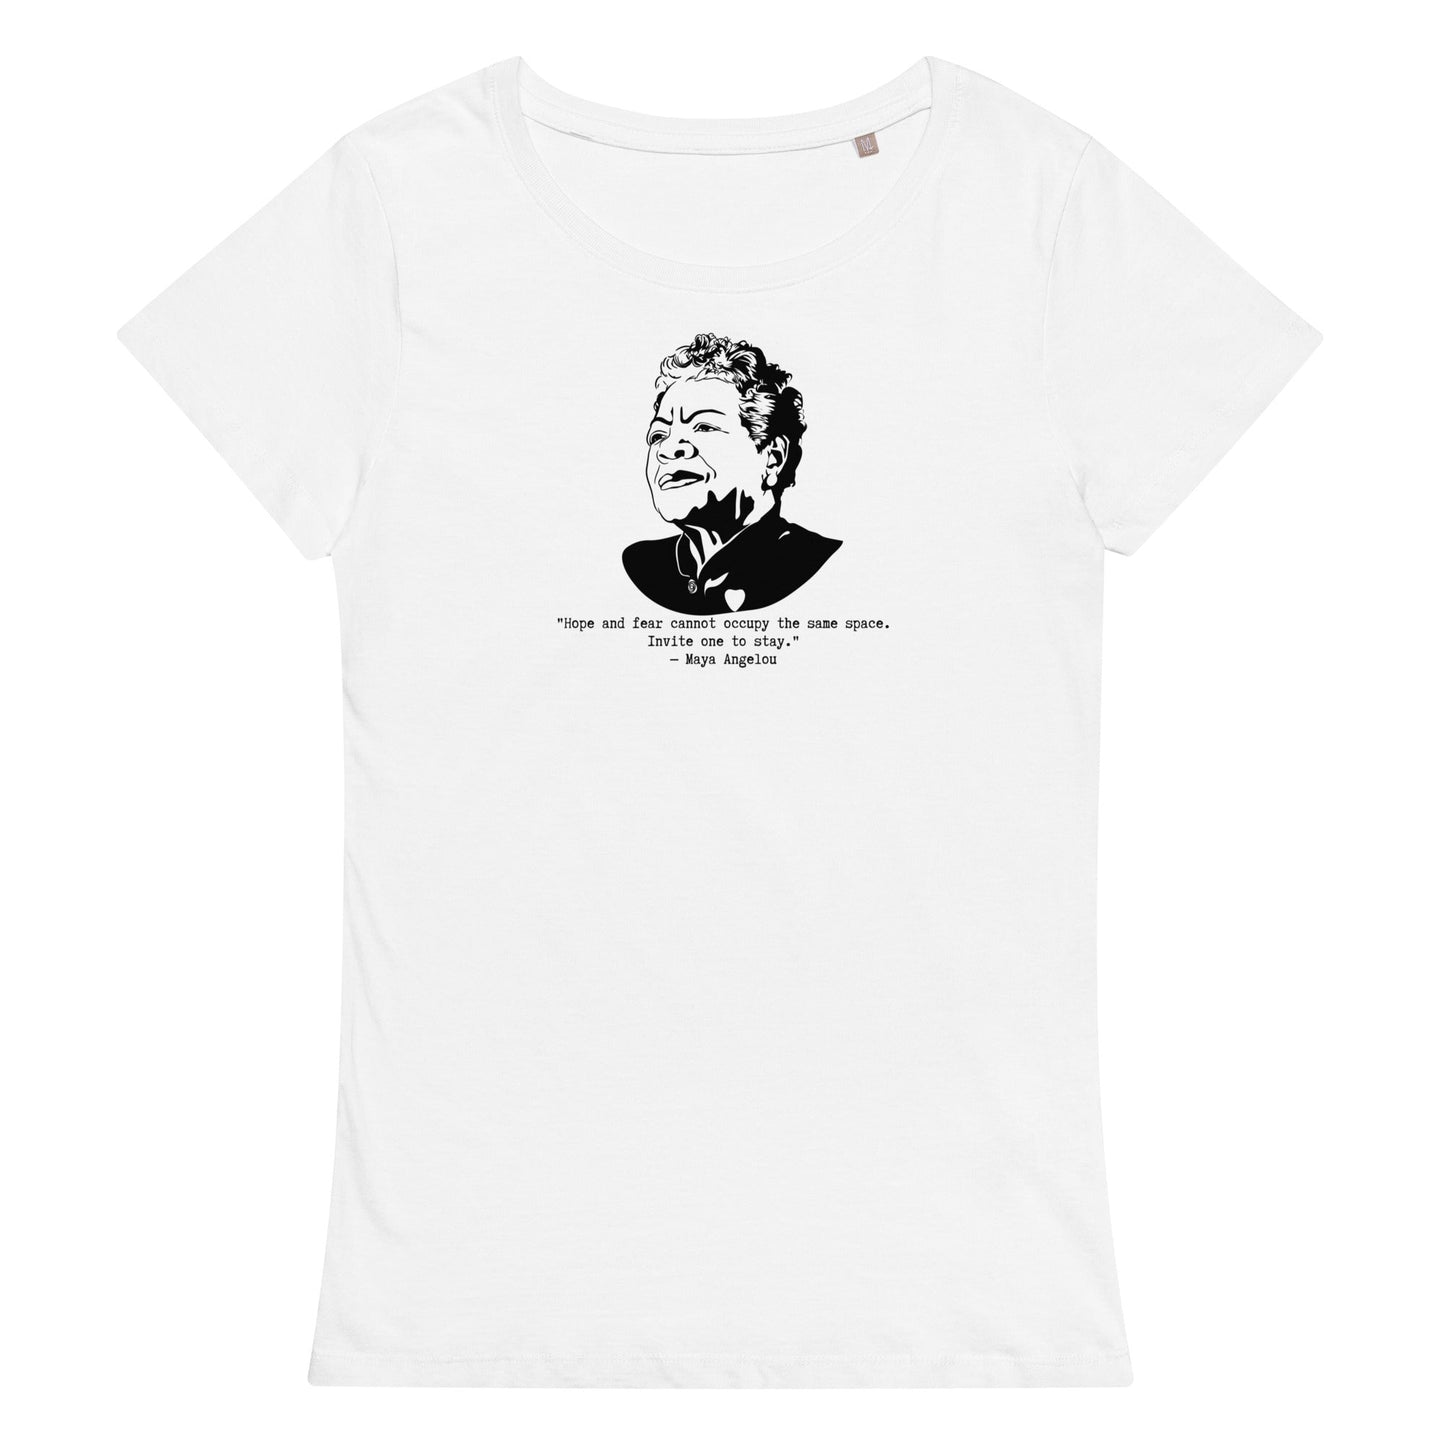 Maya Angelou "Hope and fear cannot occupy the same space" organic t-shirt